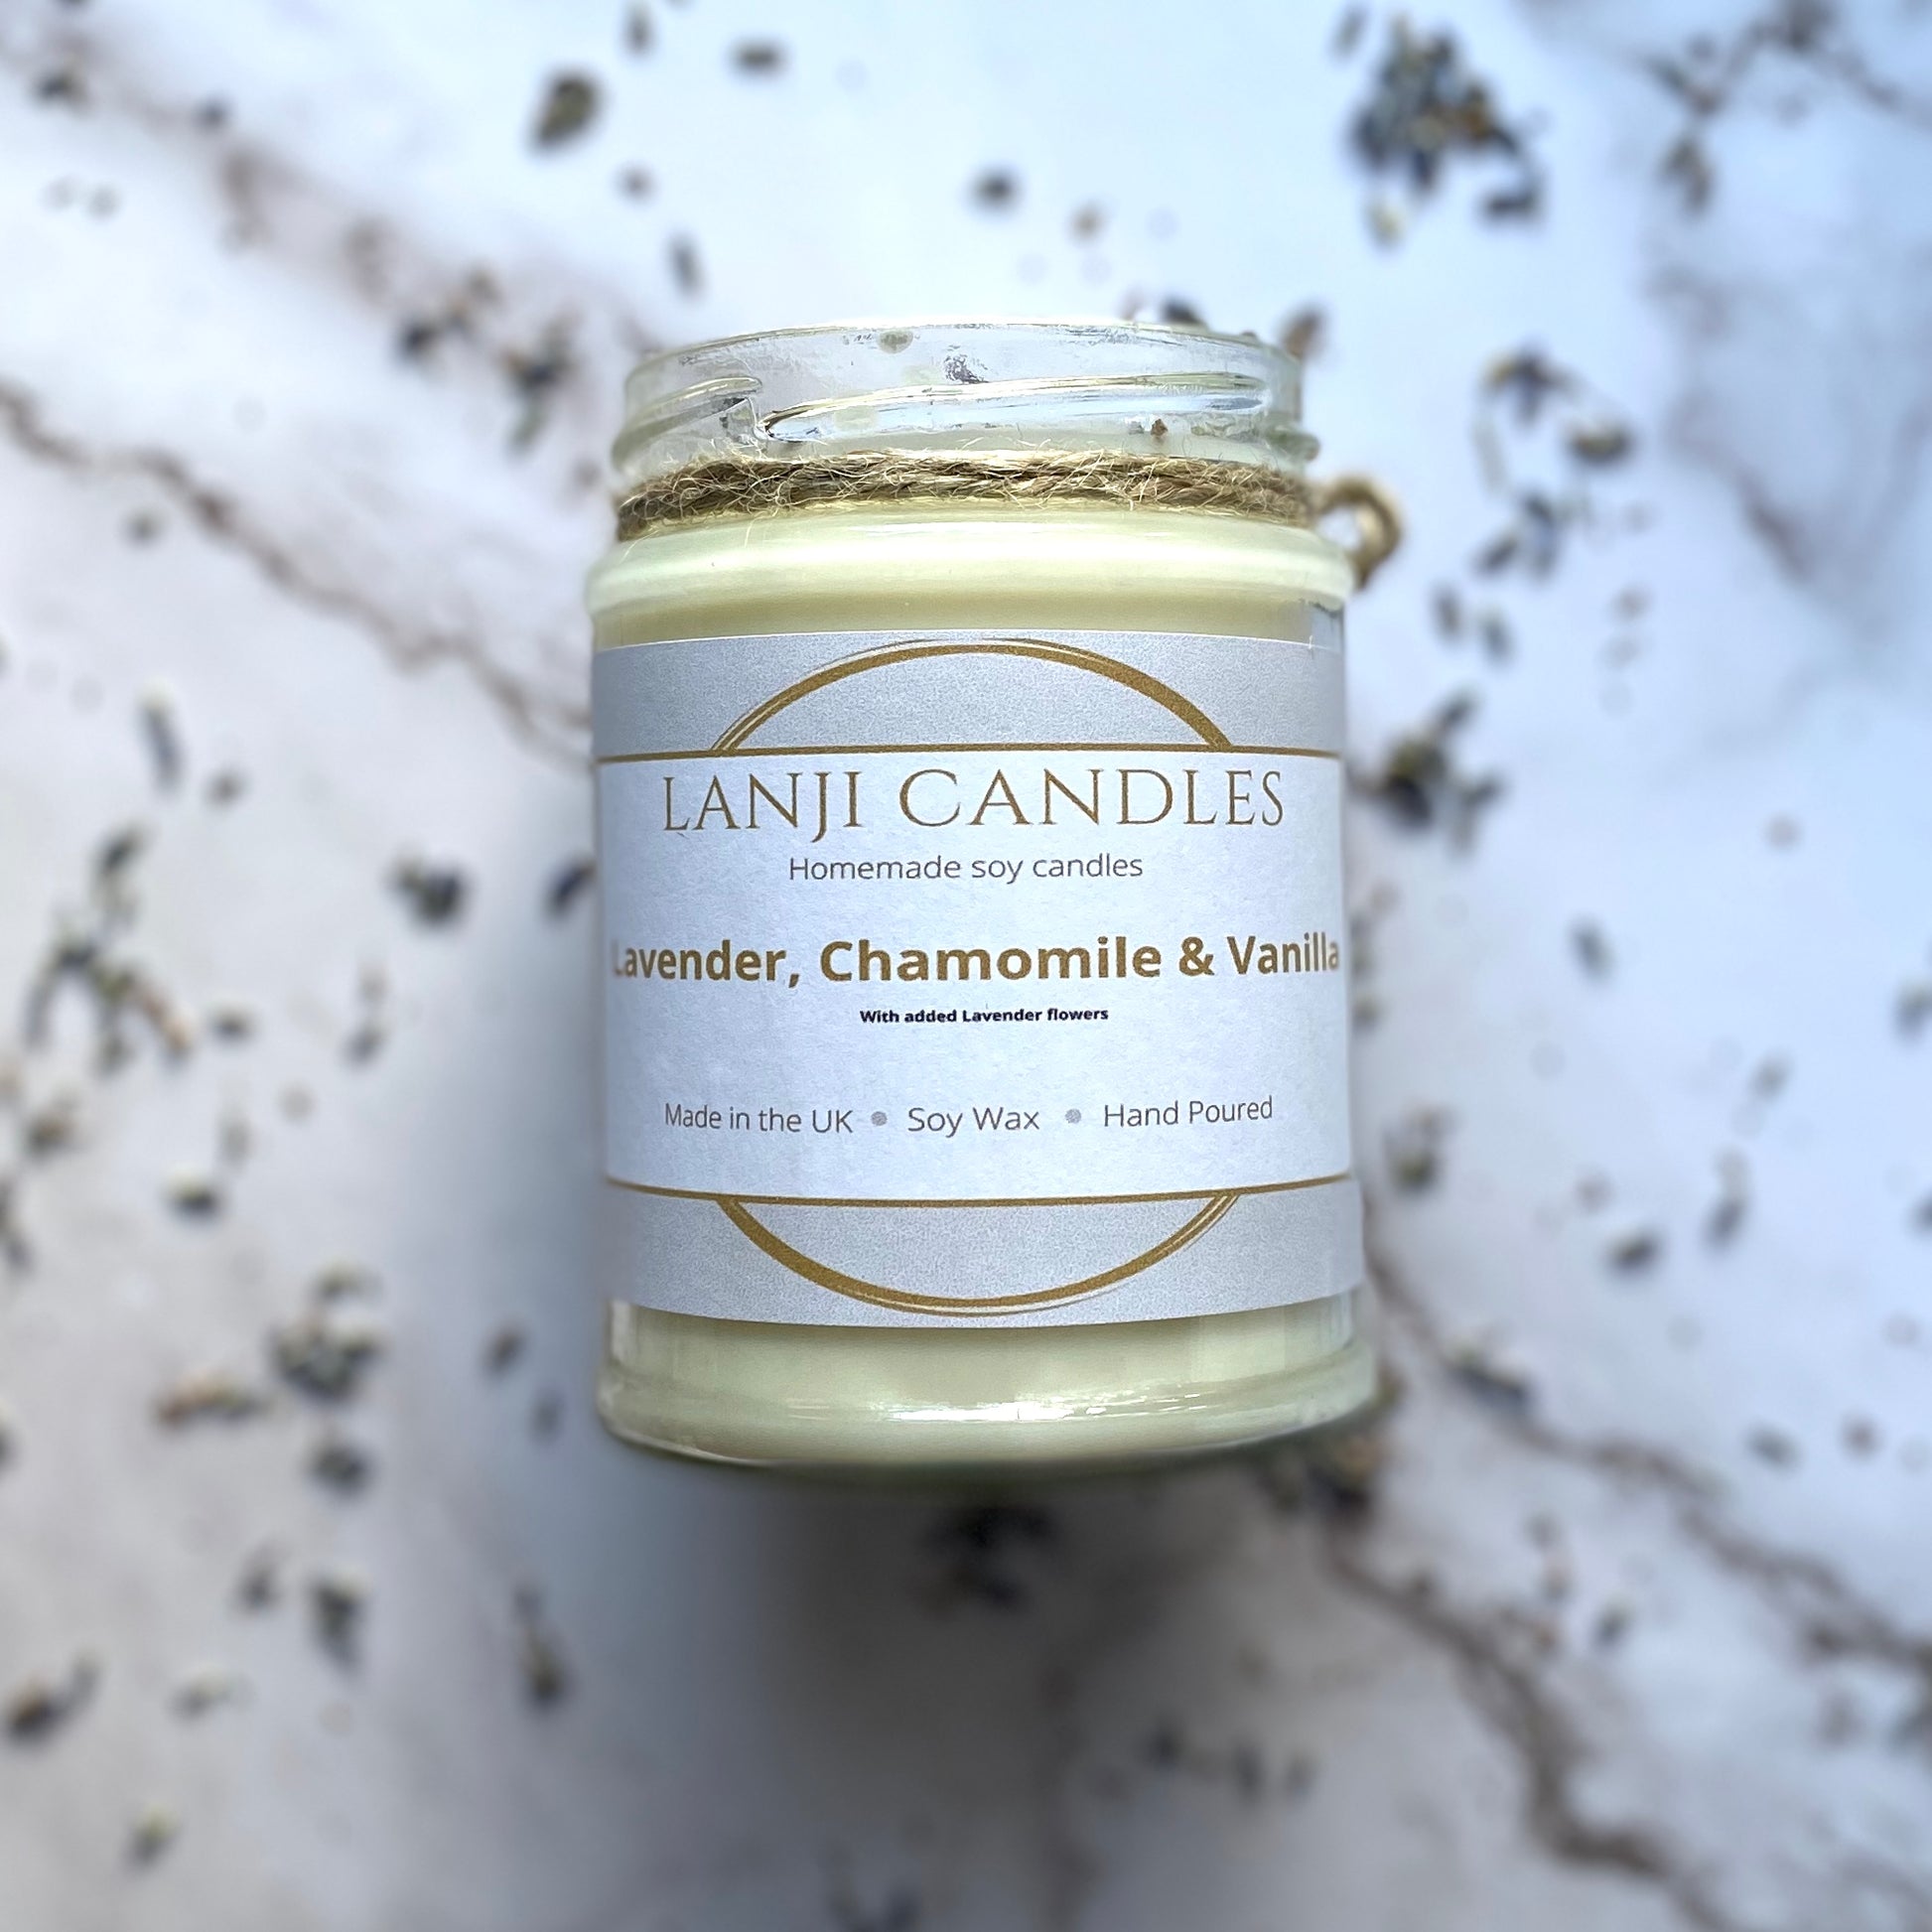 Lavender, Chamomile & Vanilla scented soy wax candle - Lanji Candles